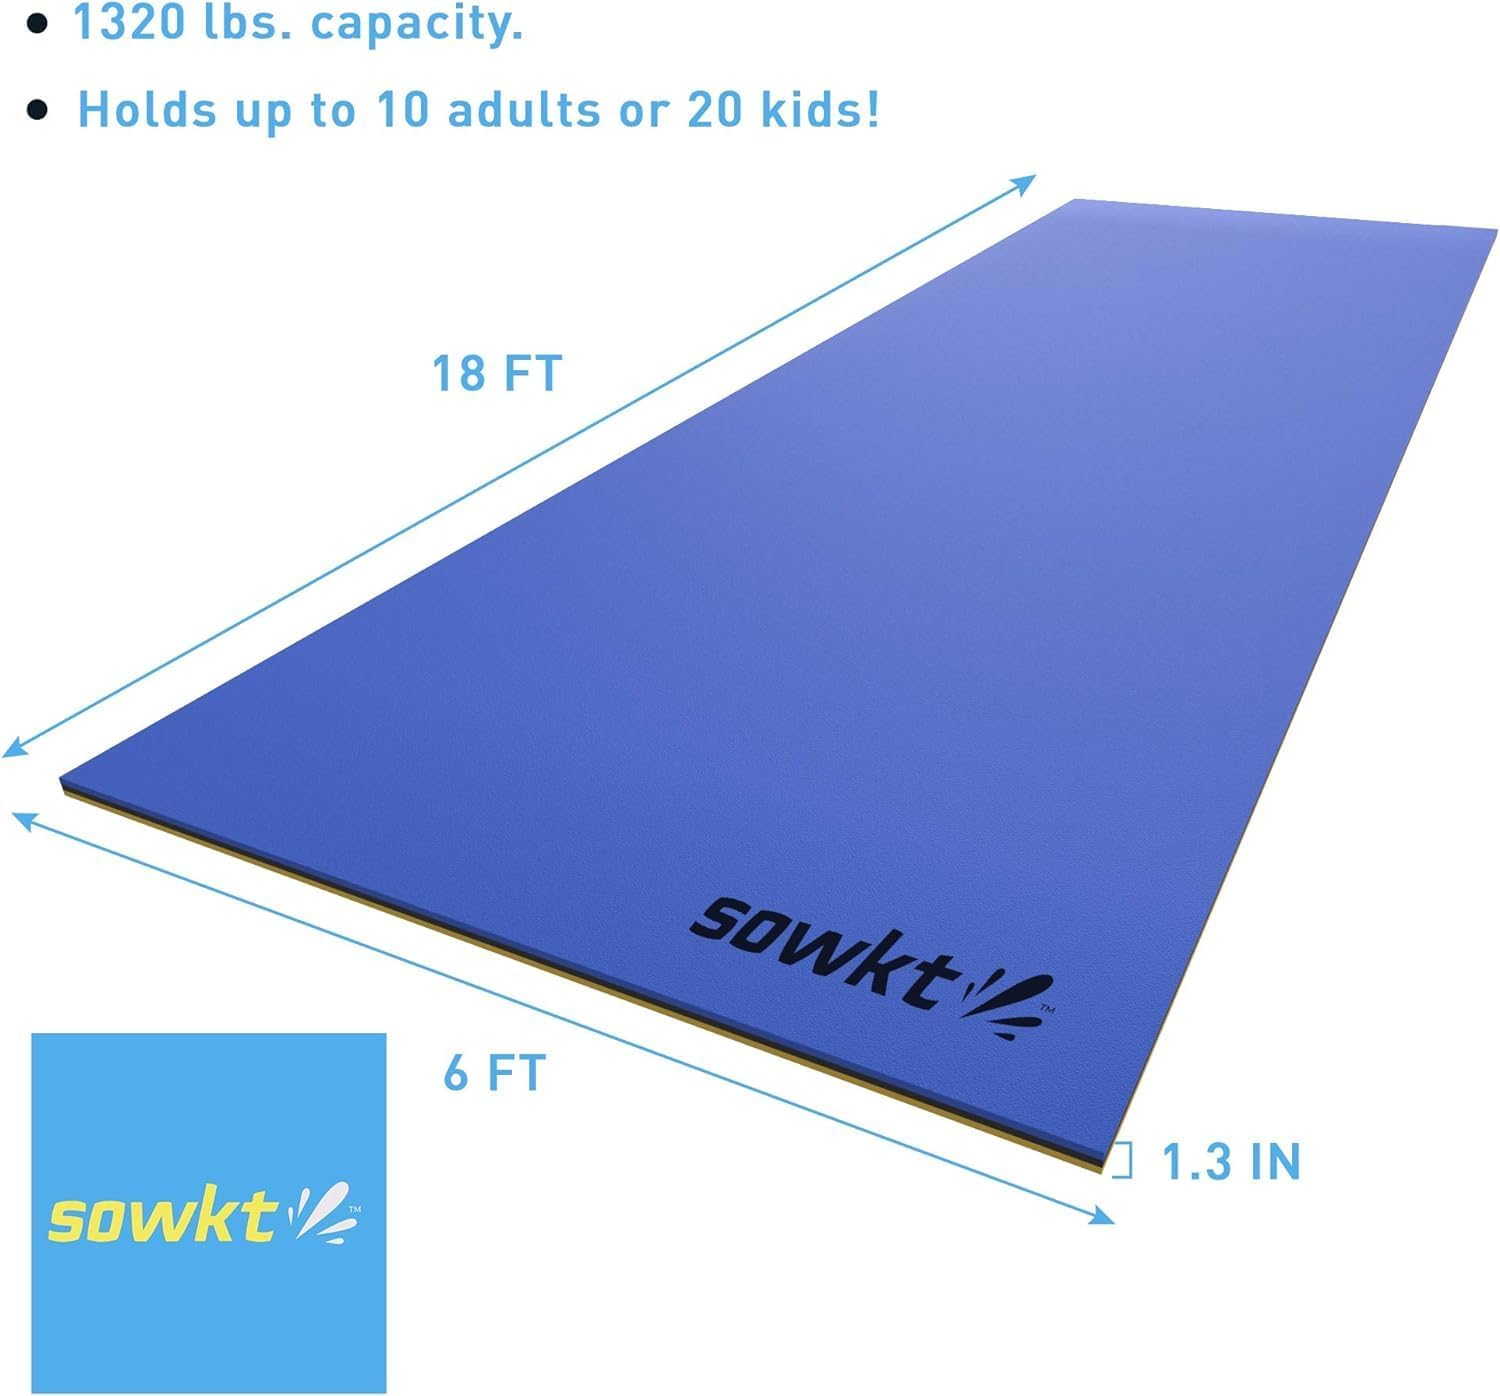 SOWKT Lily Pad Floating Mat (18 x 6 ft) - Made in USA - Premium Floating Water Mat for The Lake and Boating - Giant Floating Water Pad for Lakes | Lilly Pad Floating Water Dock (Blue/Yellow)